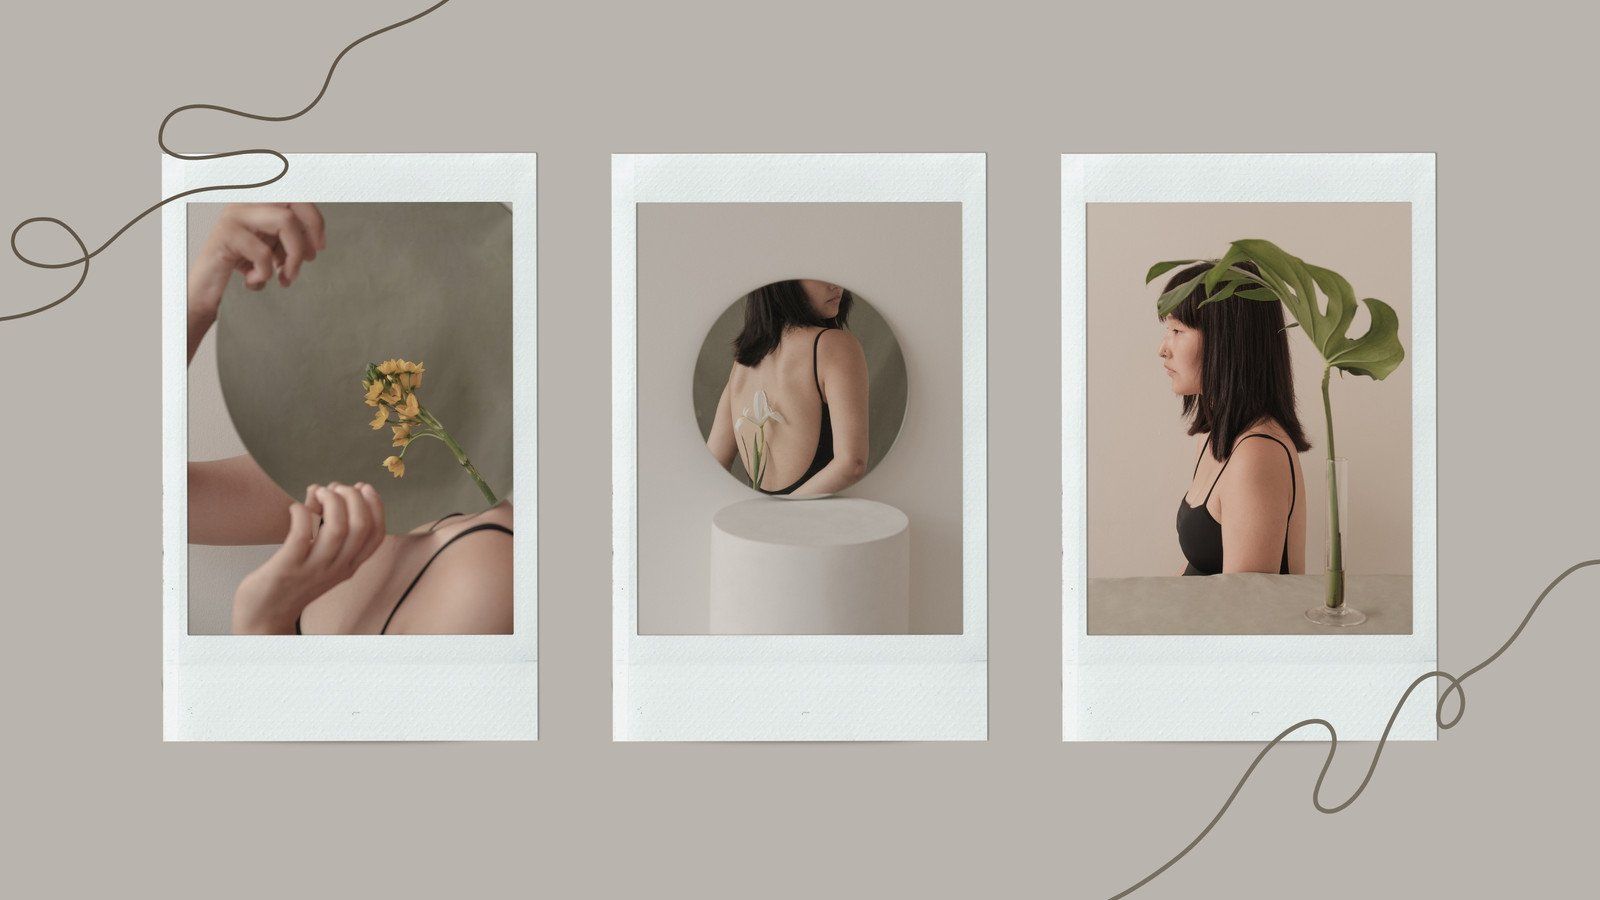 Three polaroid picture frames on a beige background. The first one shows a woman's back and a hand holding a yellow flower. The second one shows a woman's back and a hand holding a leaf. The third one shows a woman's back and a hand holding a leaf. - Abstract